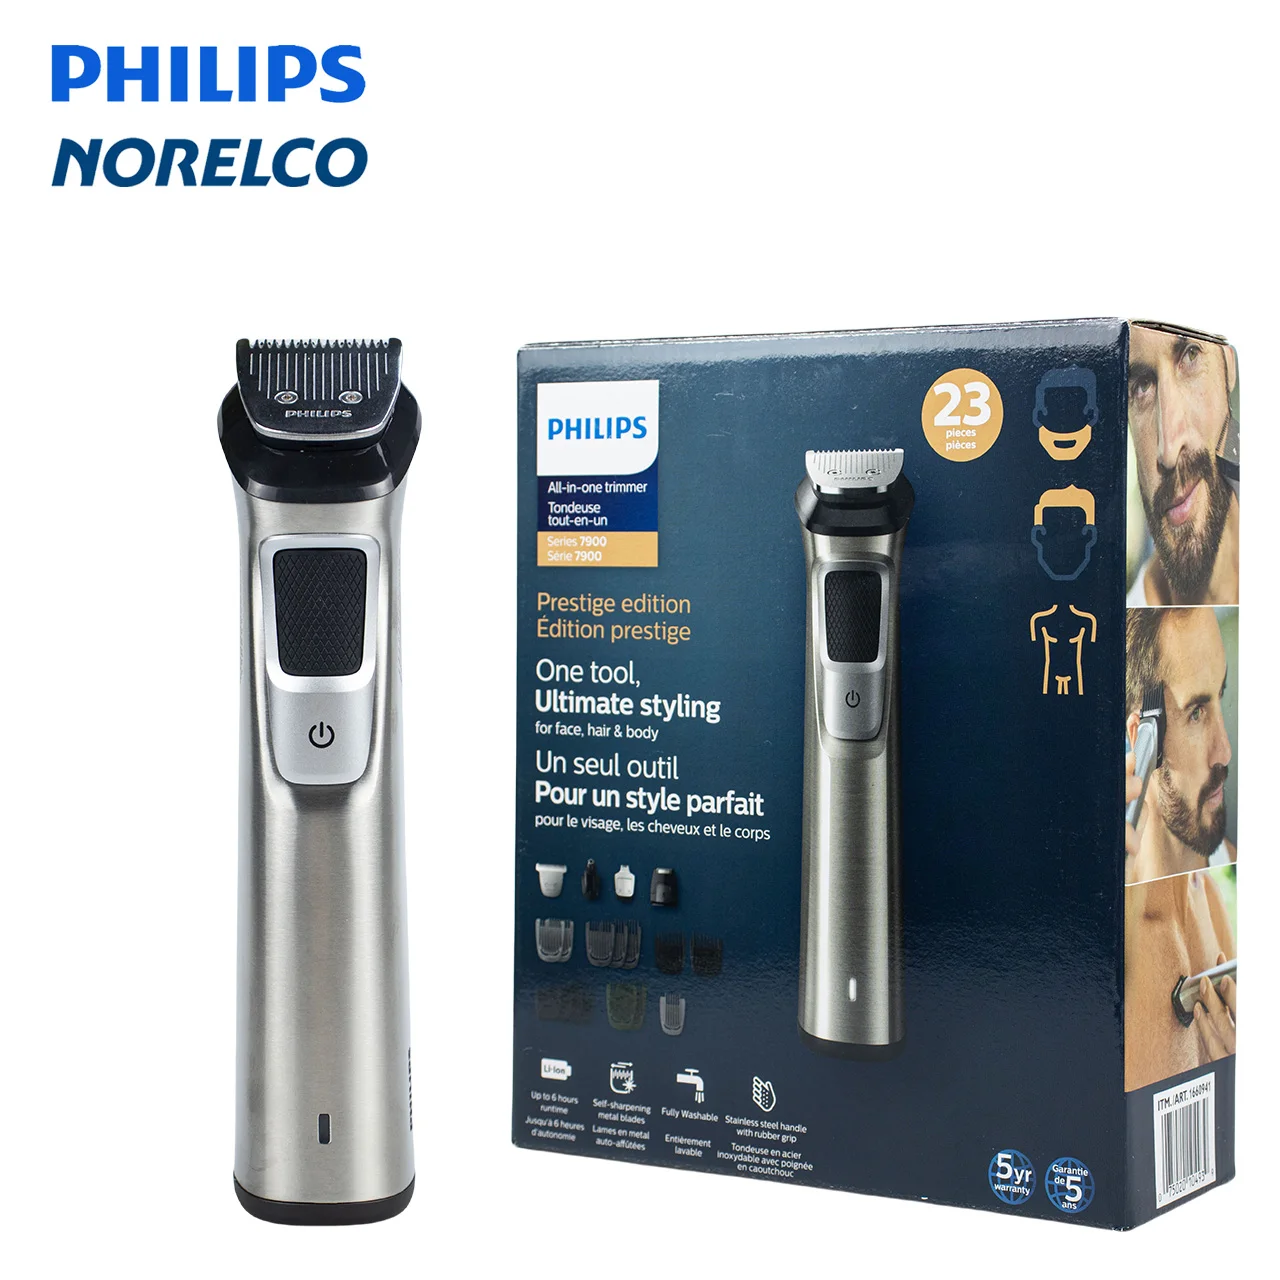 

Philips Norelco Rechargeable Hybrid Electric Trimmer and Shaver MG7790, Stainless steel 30 Lithium-Ion